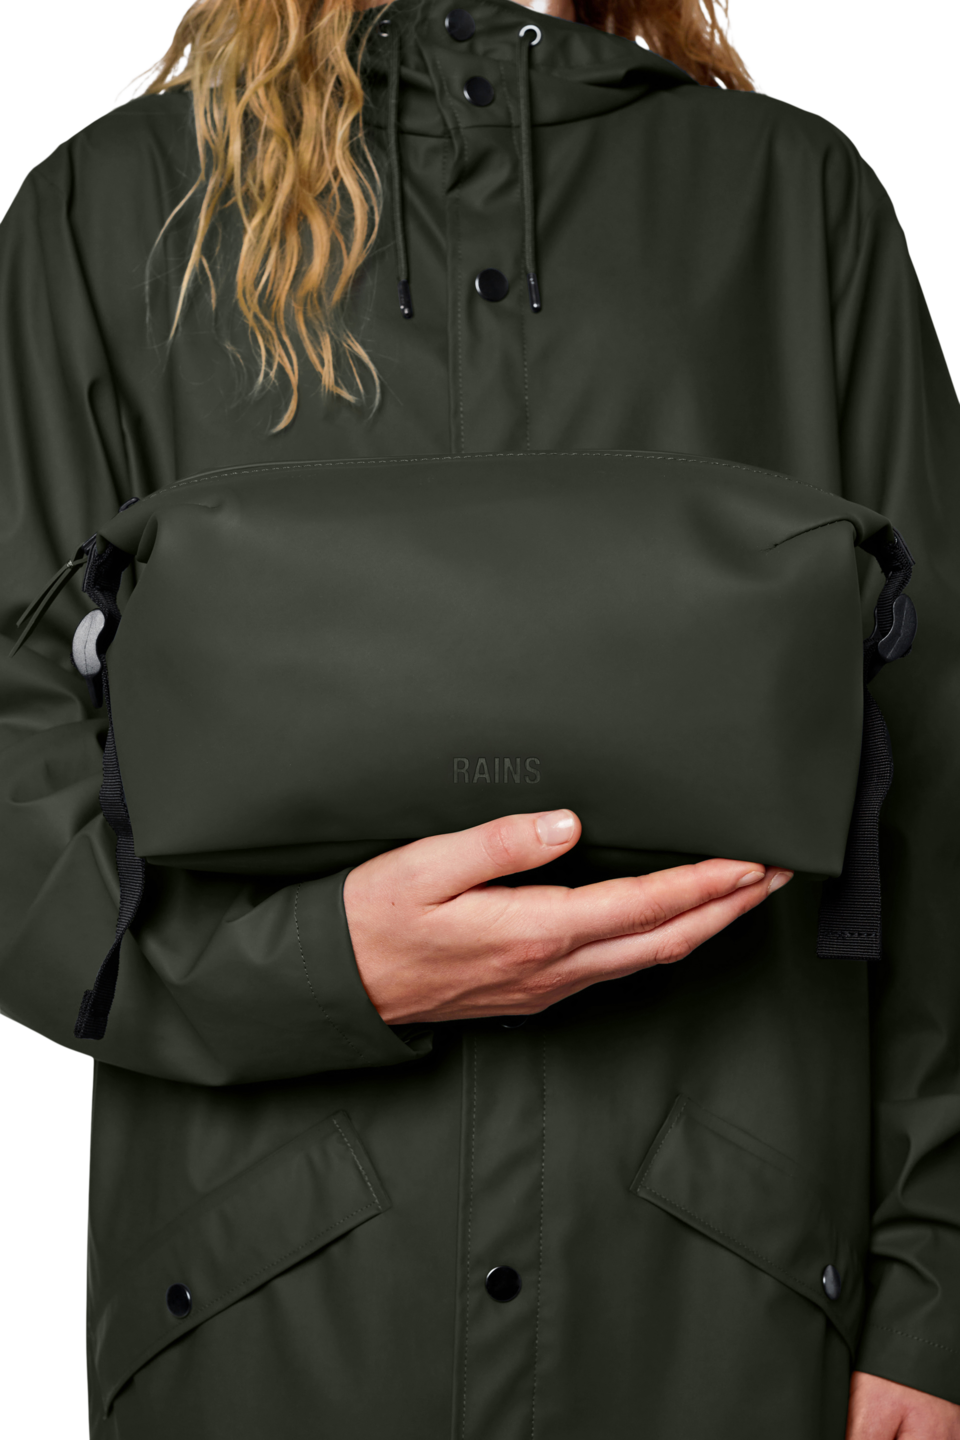 person wearing a green jacket is holding the Green waterproof weekend wash bag by rains - studio shot against a white background